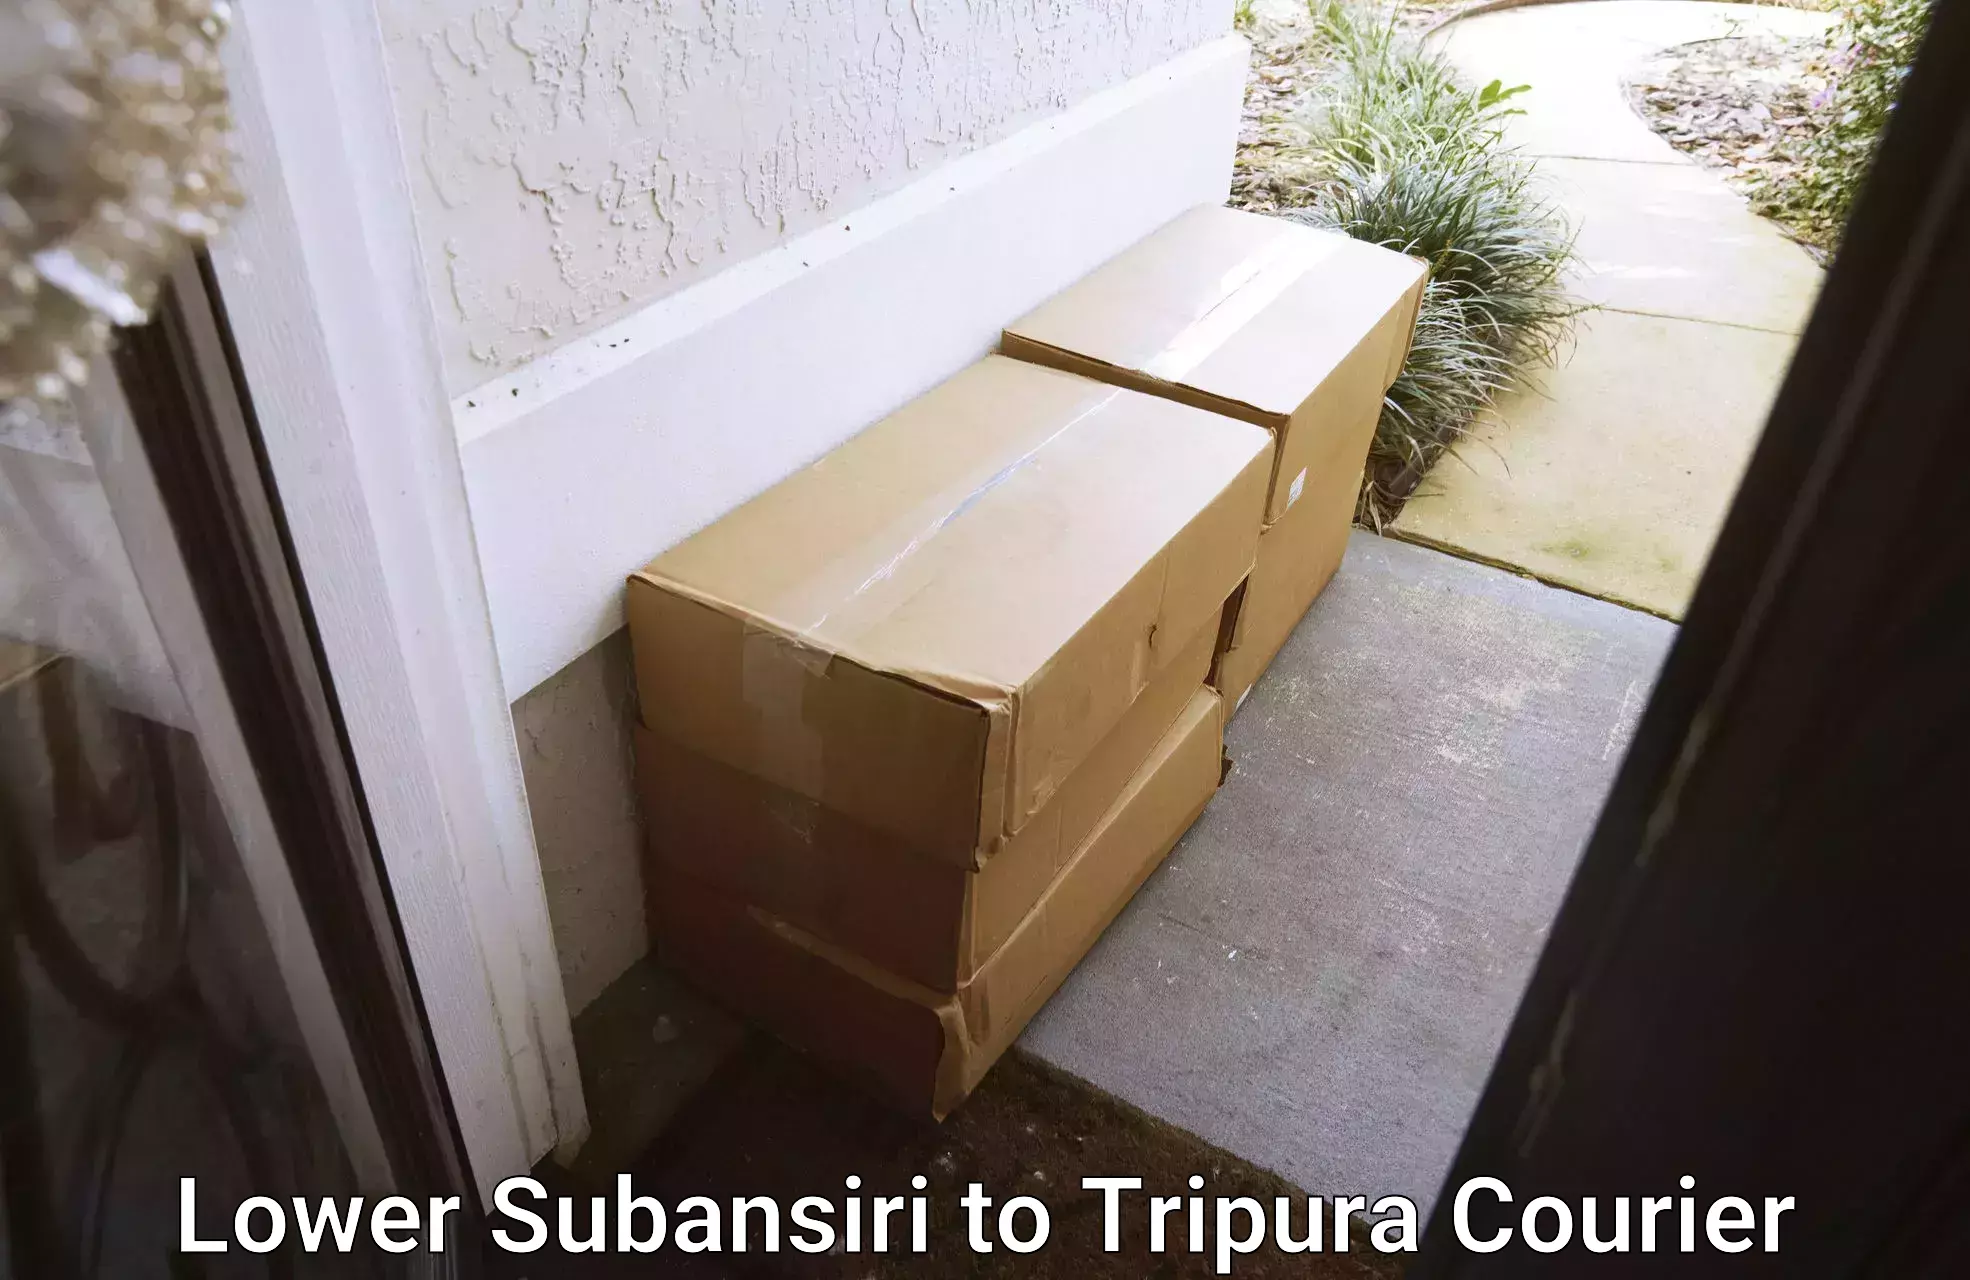 Large package courier in Lower Subansiri to Kailashahar